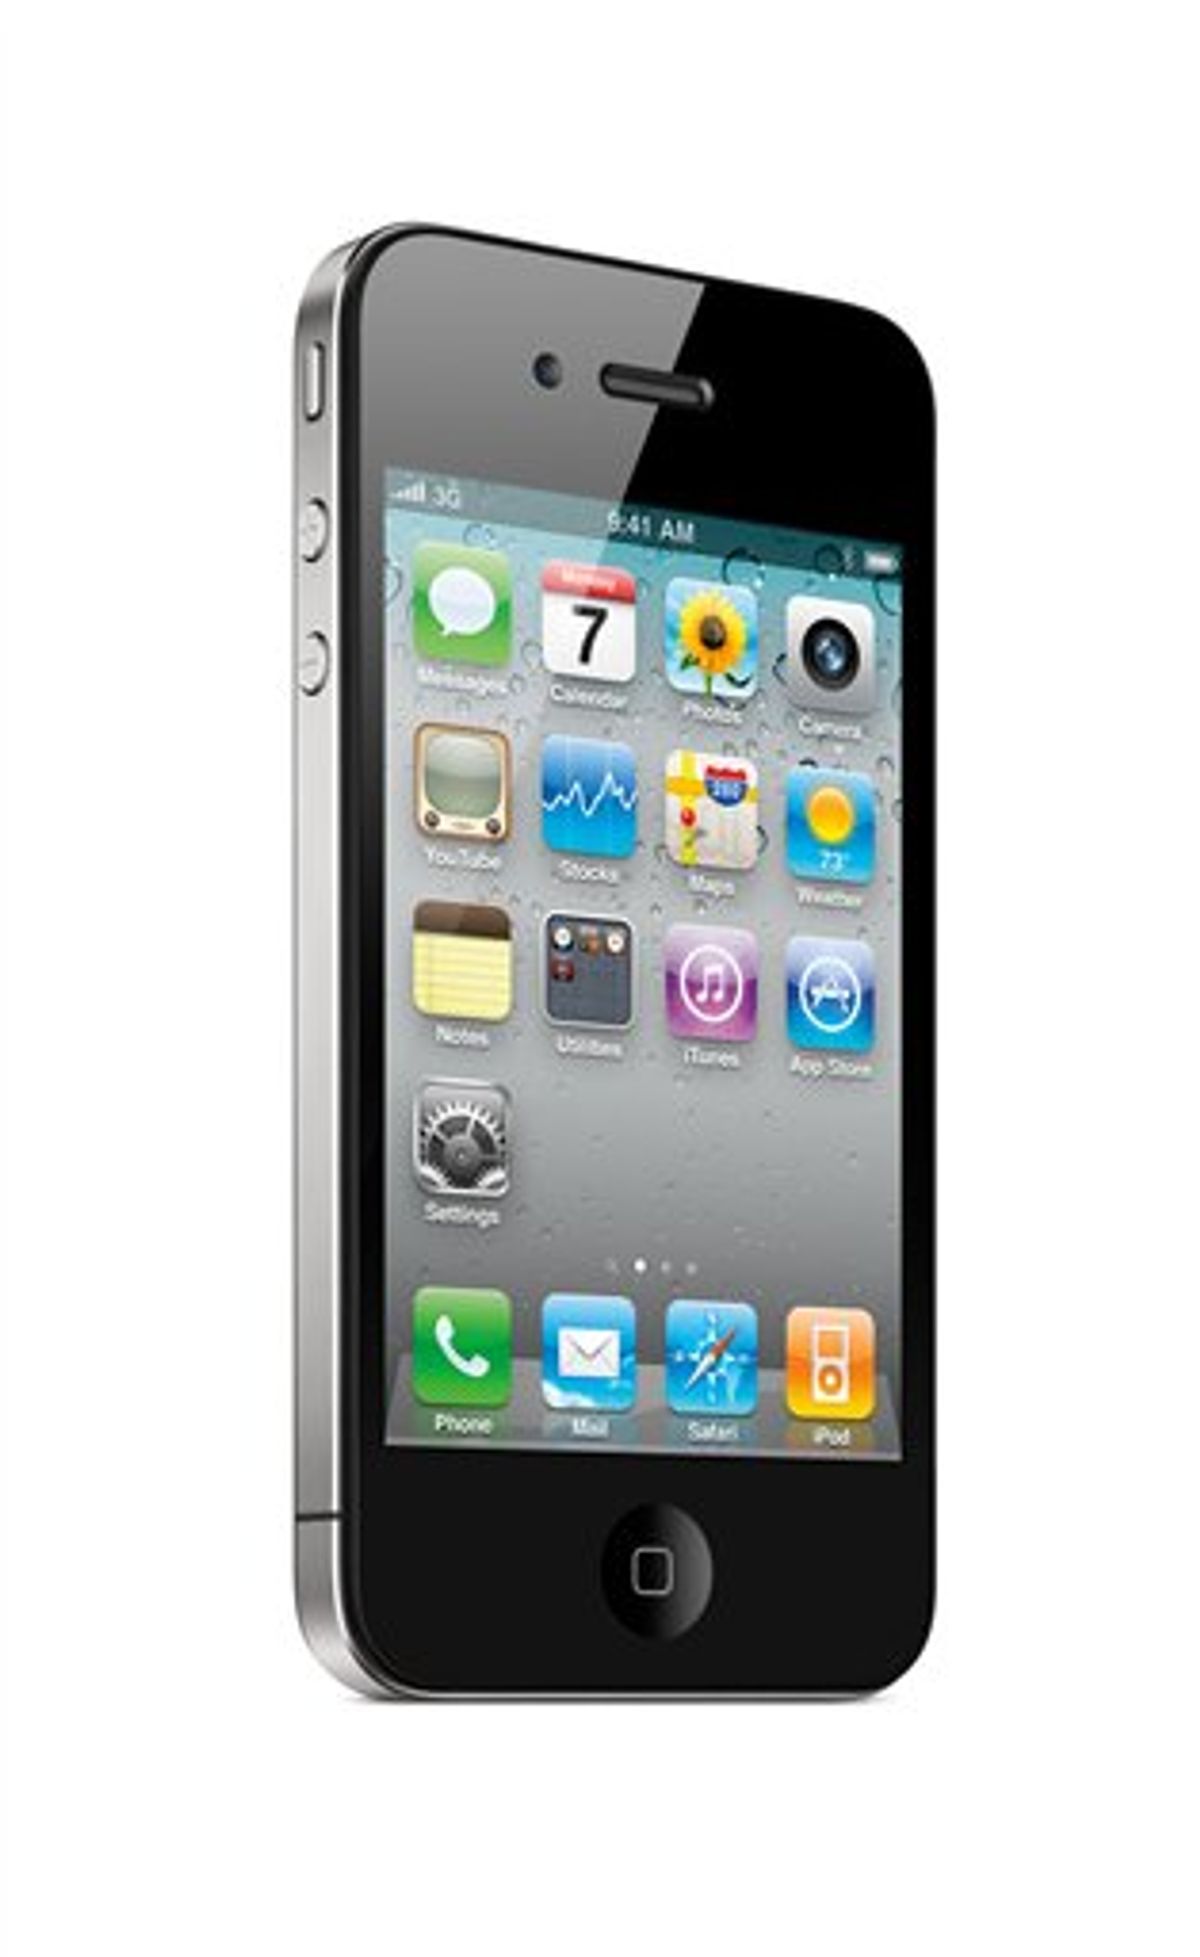 This product image provided by Apple Inc., Monday, June 7, 2010, shows an iPhone 4. Apple CEO Steve Jobs said the device will have a higher-resolution screen, longer battery life and thinner design. The new iPhone 4 is due to be released June 24. It will cost $199 or $299, depending on the capacity. (AP Photo/Apple Inc.) ** NO SALES ** (AP)